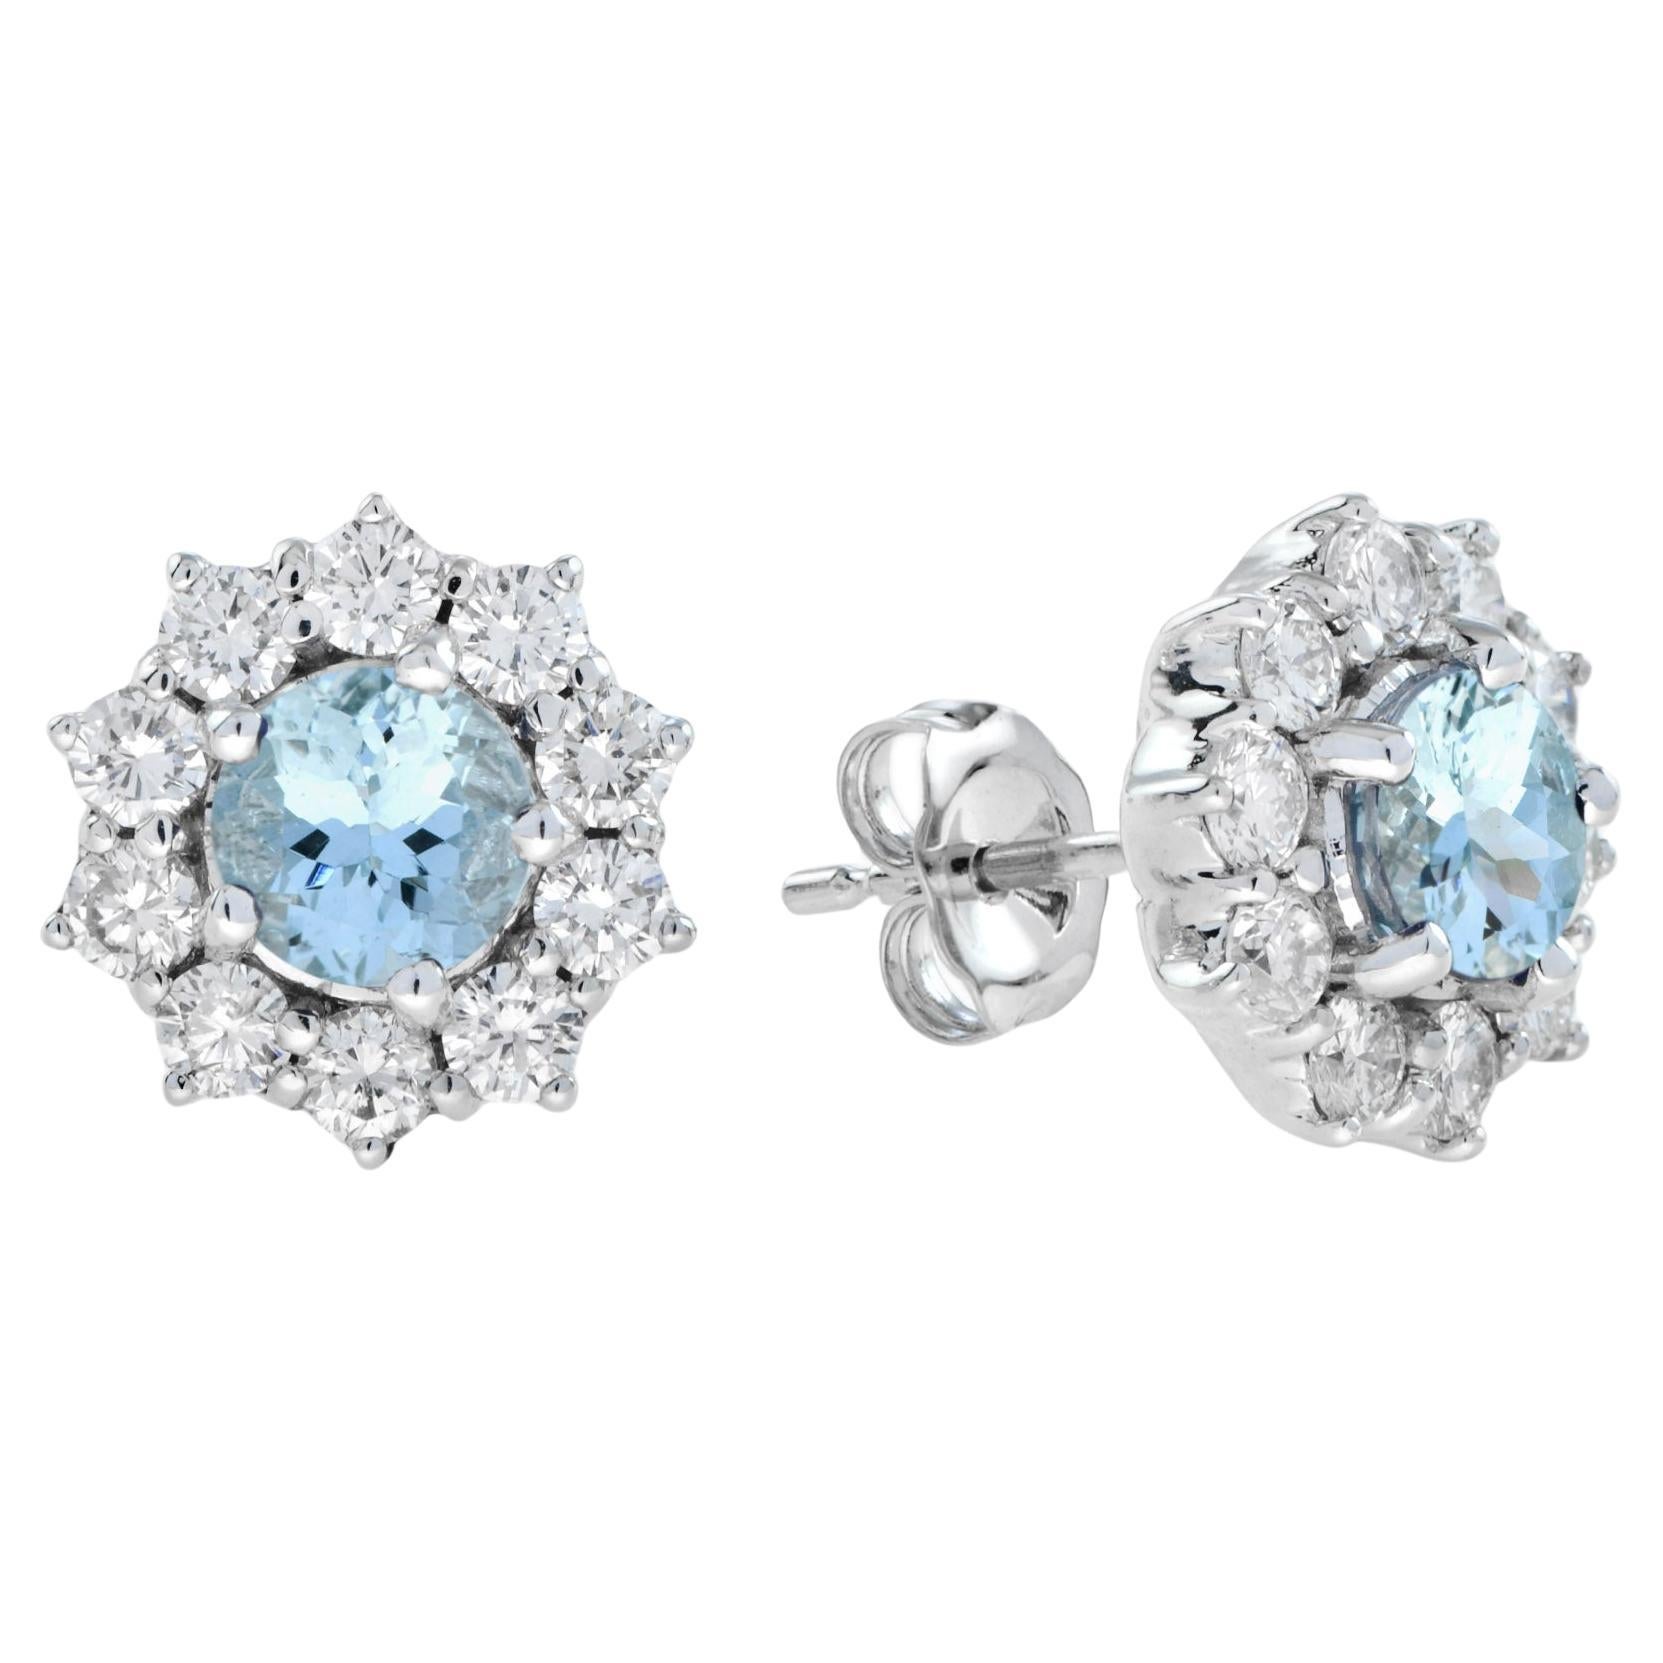 Aquamarine and Diamond Halo Classic Style Stud Earrings in 18K White Gold